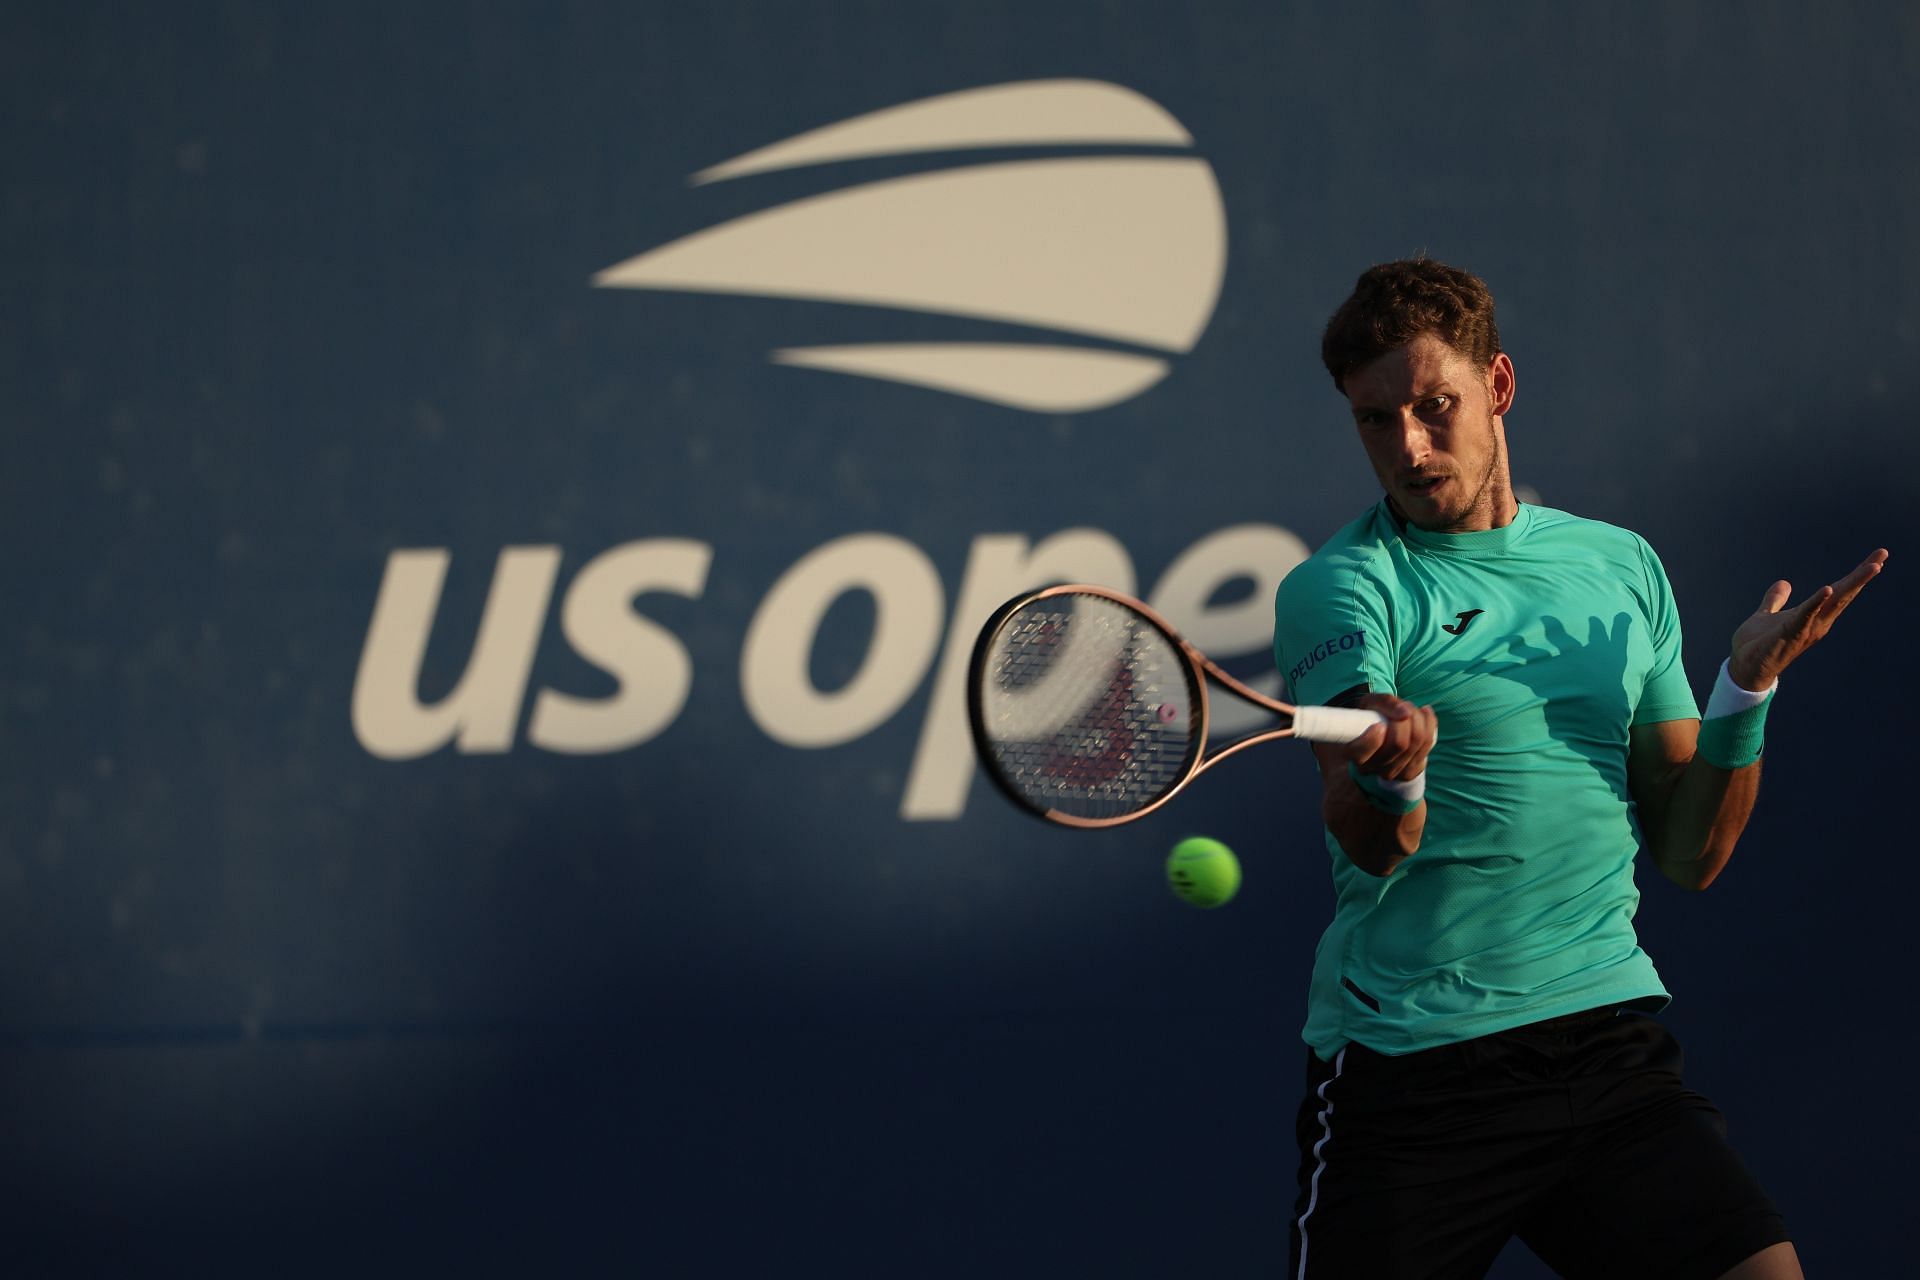 Carreno Busta plays a forehand against Dominic Thiem at the 2022 US Open - Day 1